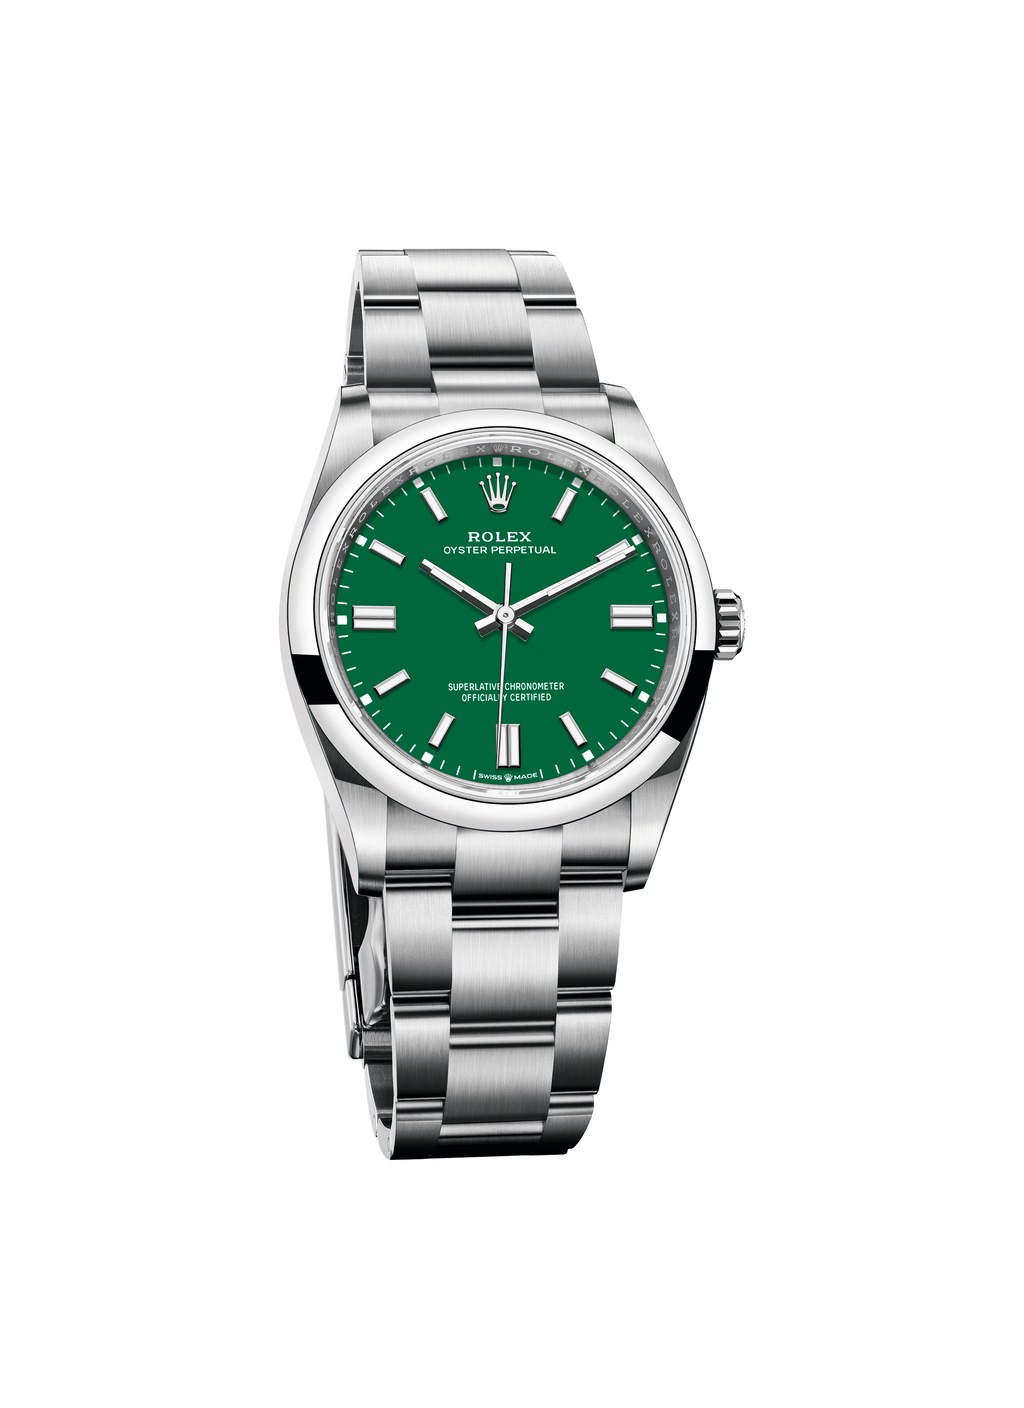 Which Rolex Oyster Perpetual 2020 dial 